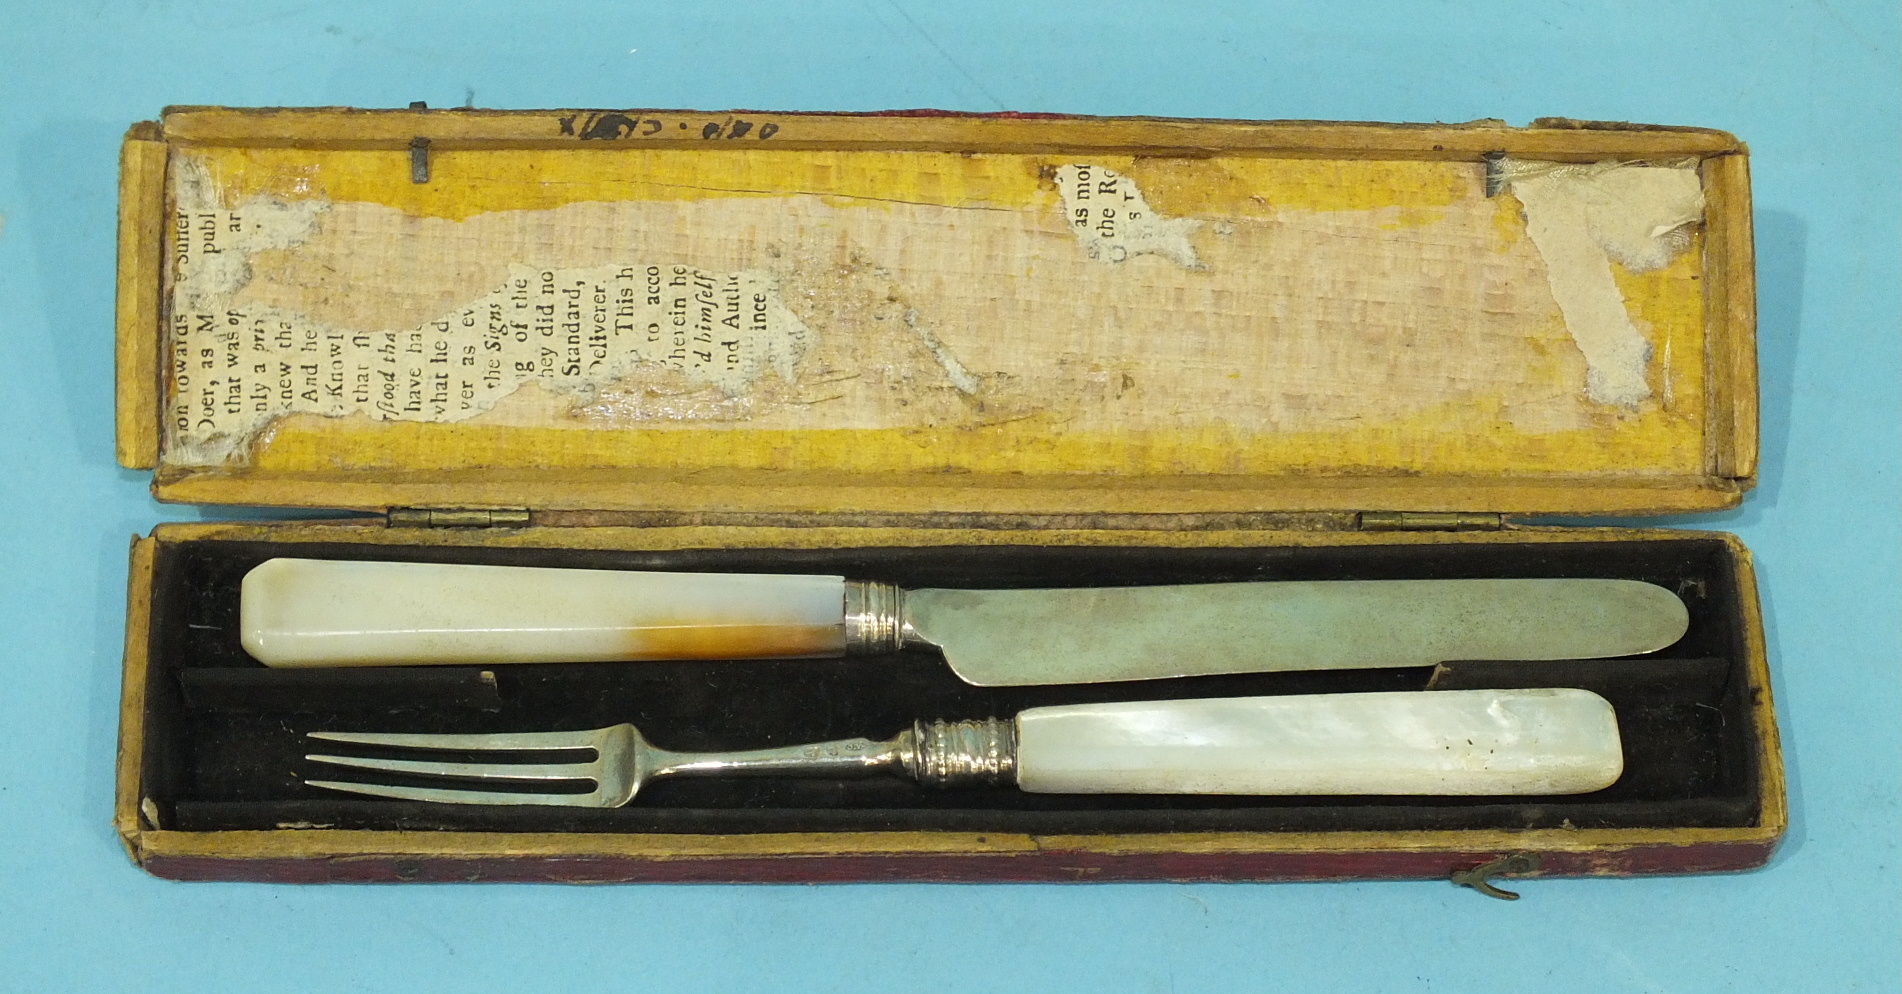 A George III silver fruit knife and fork with mother-of-pearl handles, Birmingham 1808, maker JW, in